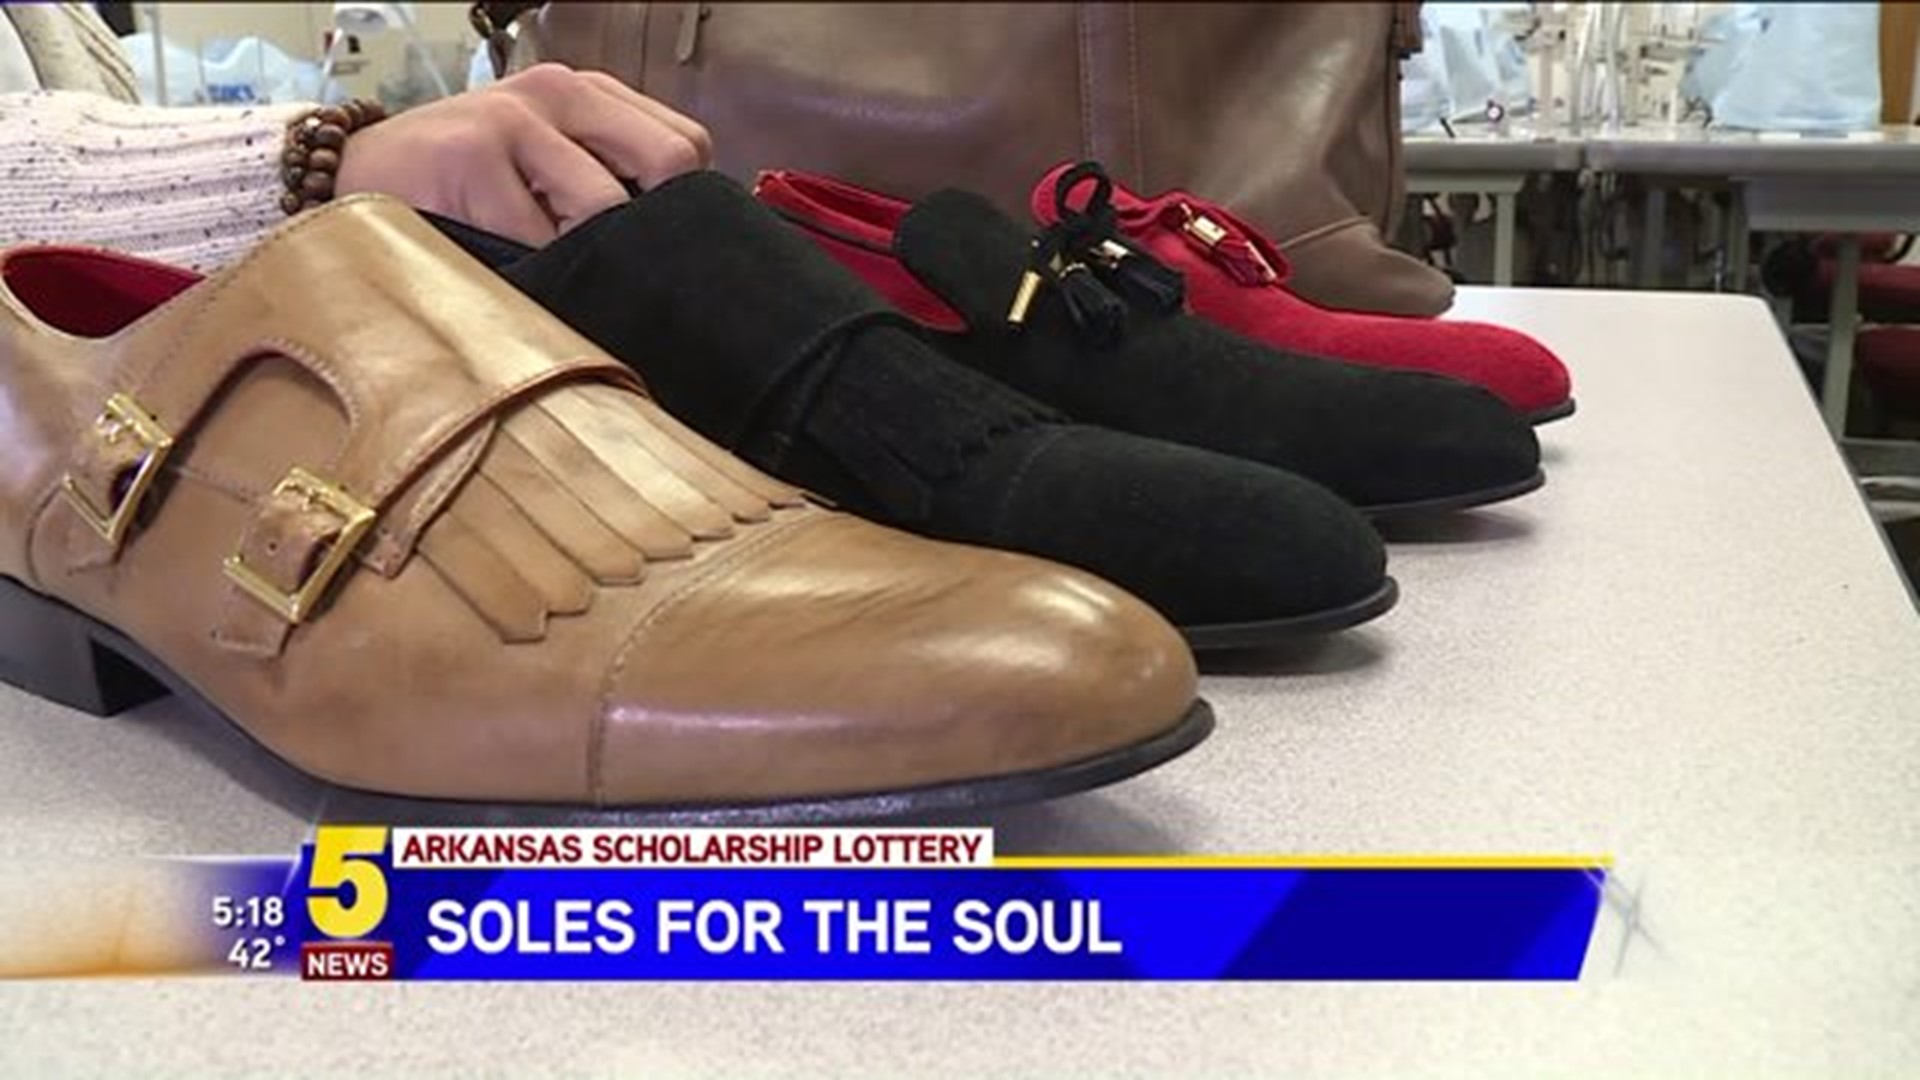 SOLES FOR THE SOUL ARK SCHOLARSHIP LOTTERY